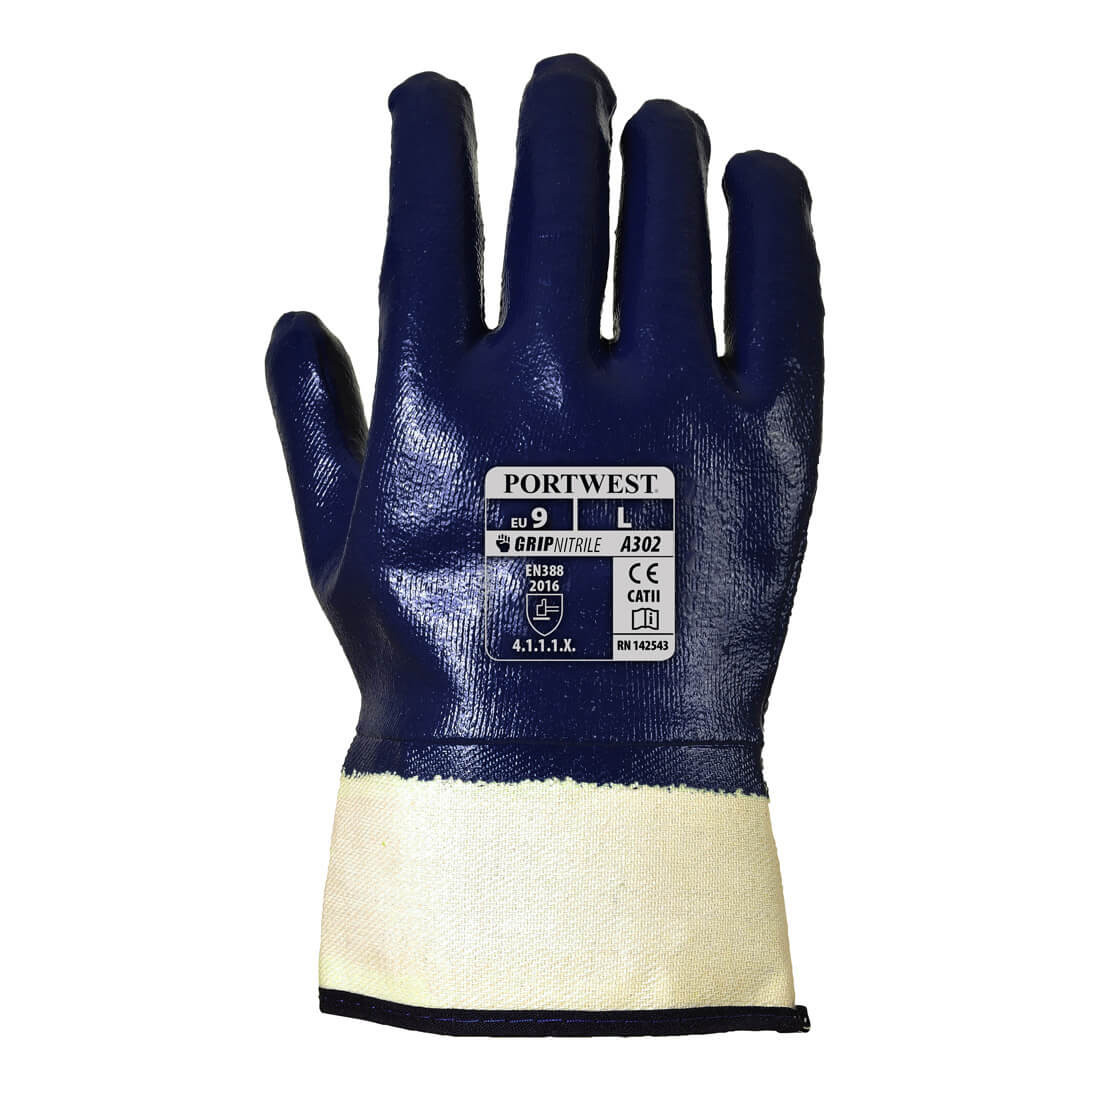 Fully Dipped Nitrile Safety Glove - Personal protection